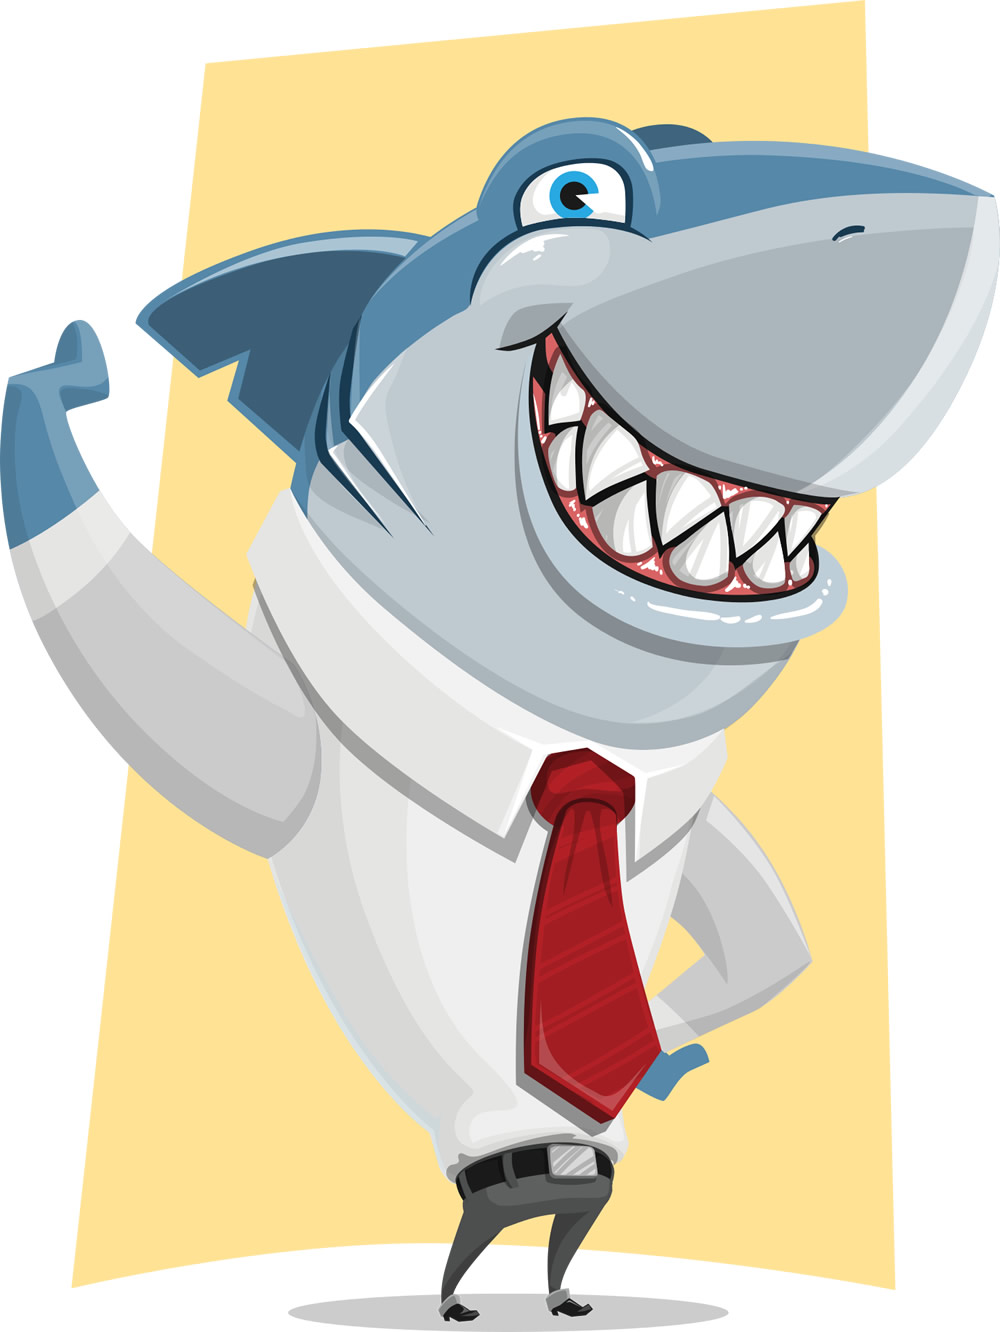 Beware the business sharks spinning too good to be true